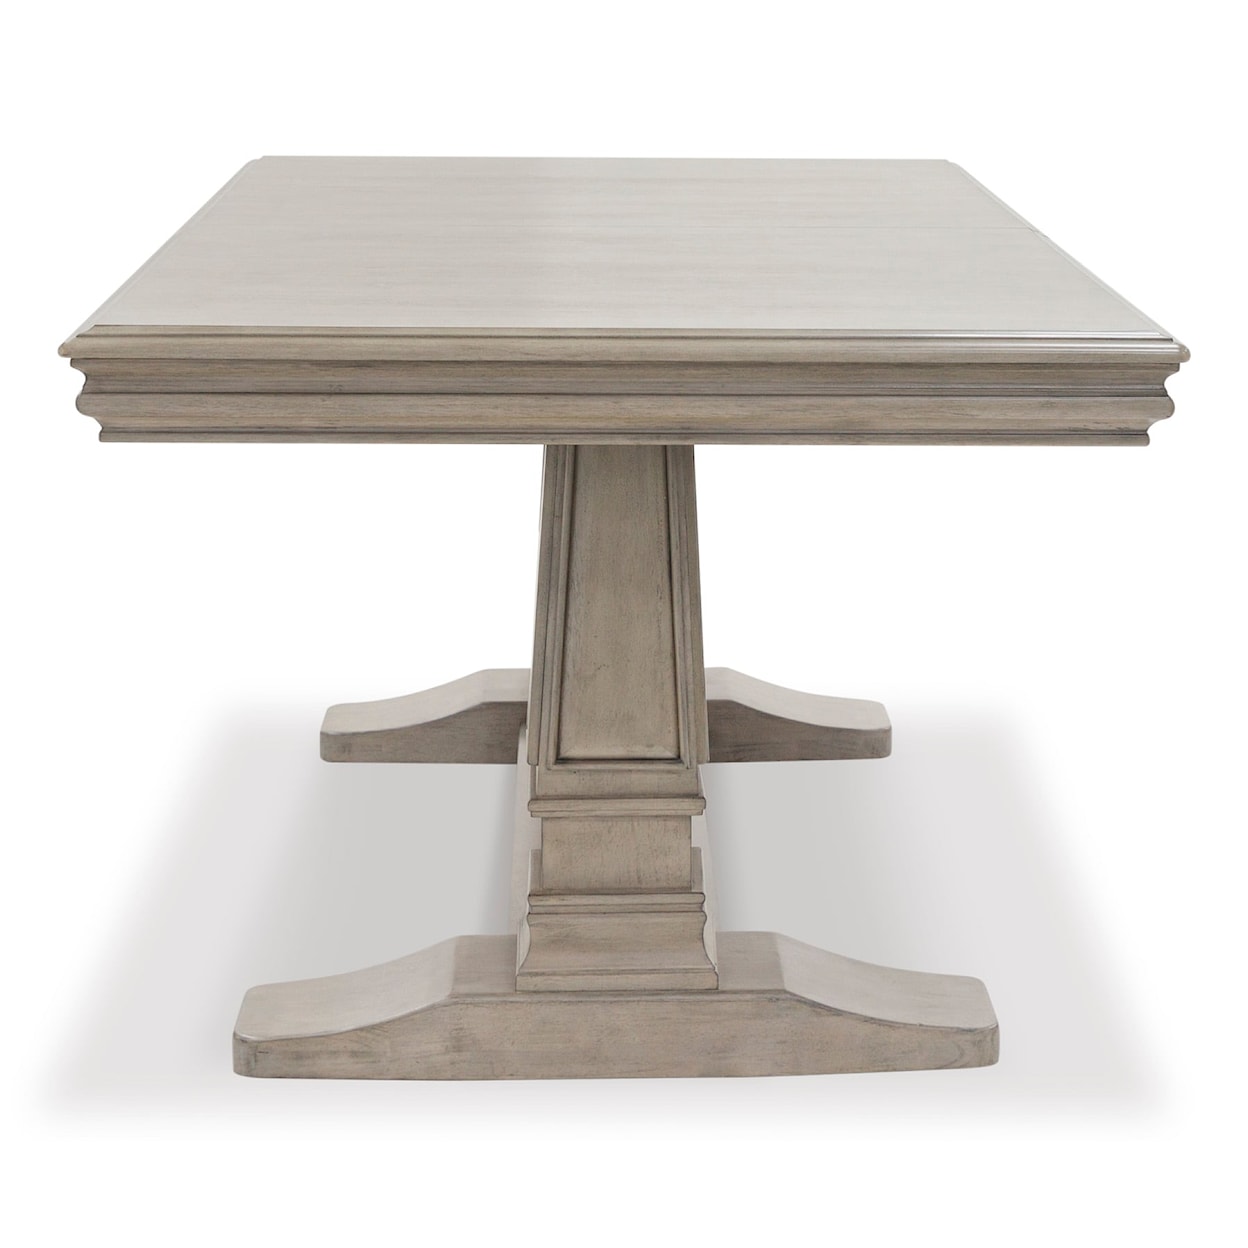 Signature Design by Ashley Lexorne Extension Dining Table